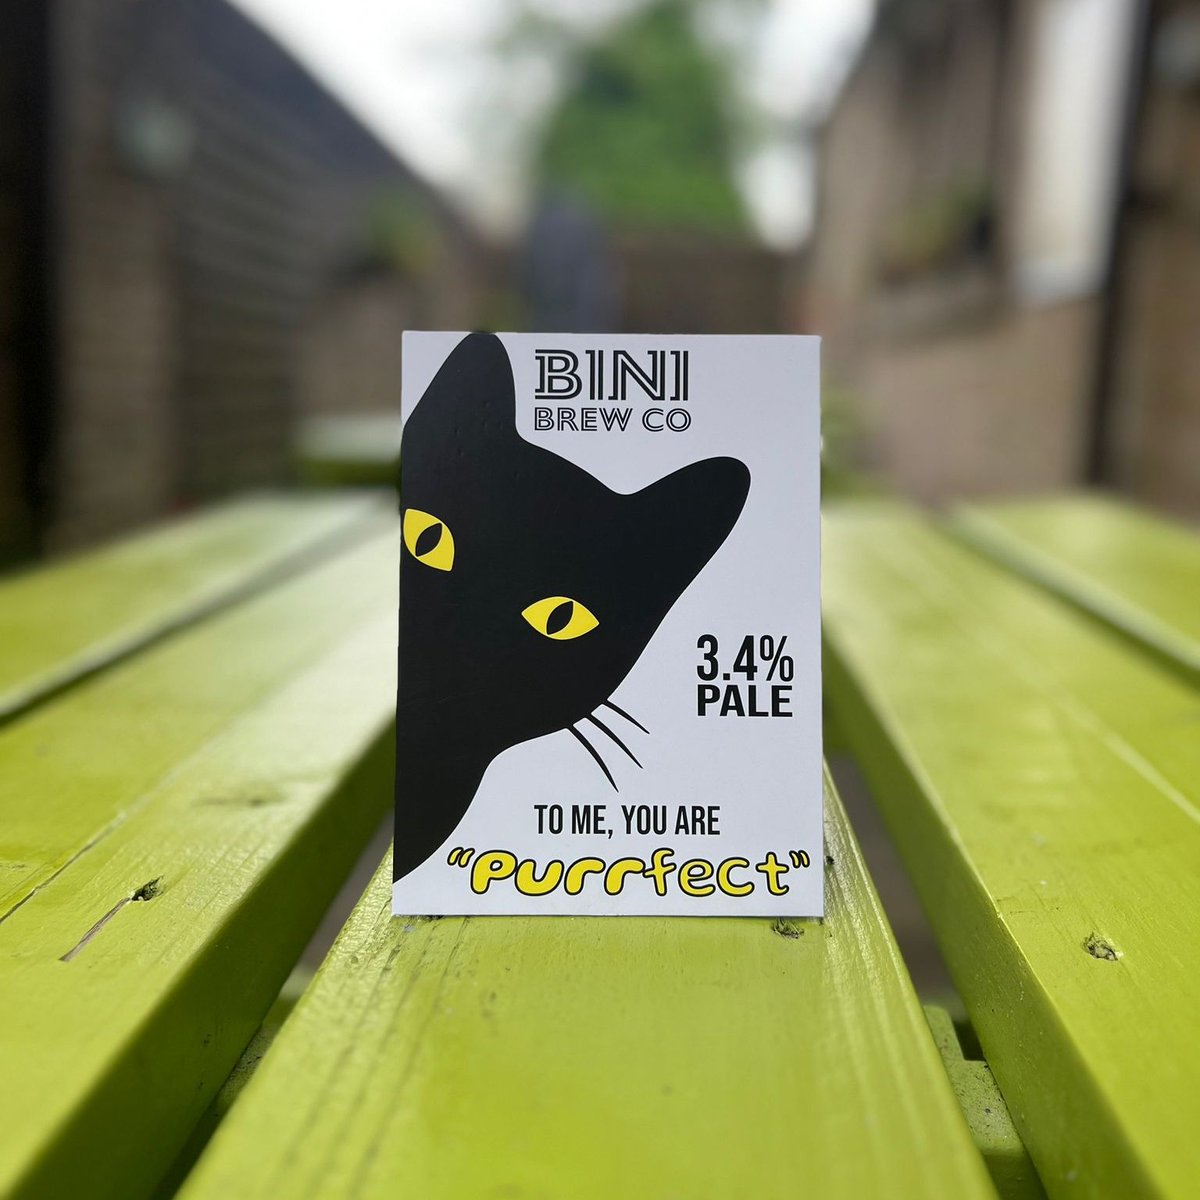 Giggles with glee hehehehe... we've gotten our hands on Bini's limited cask release of 'To me, you are Purrfect' Packed with flavour: Azacca & Ekuanot add spicy notes to a lovely dry, tropical fruit base. Hazy, refreshing & very moreish - it’s sure to get you purring! @BiniBrew